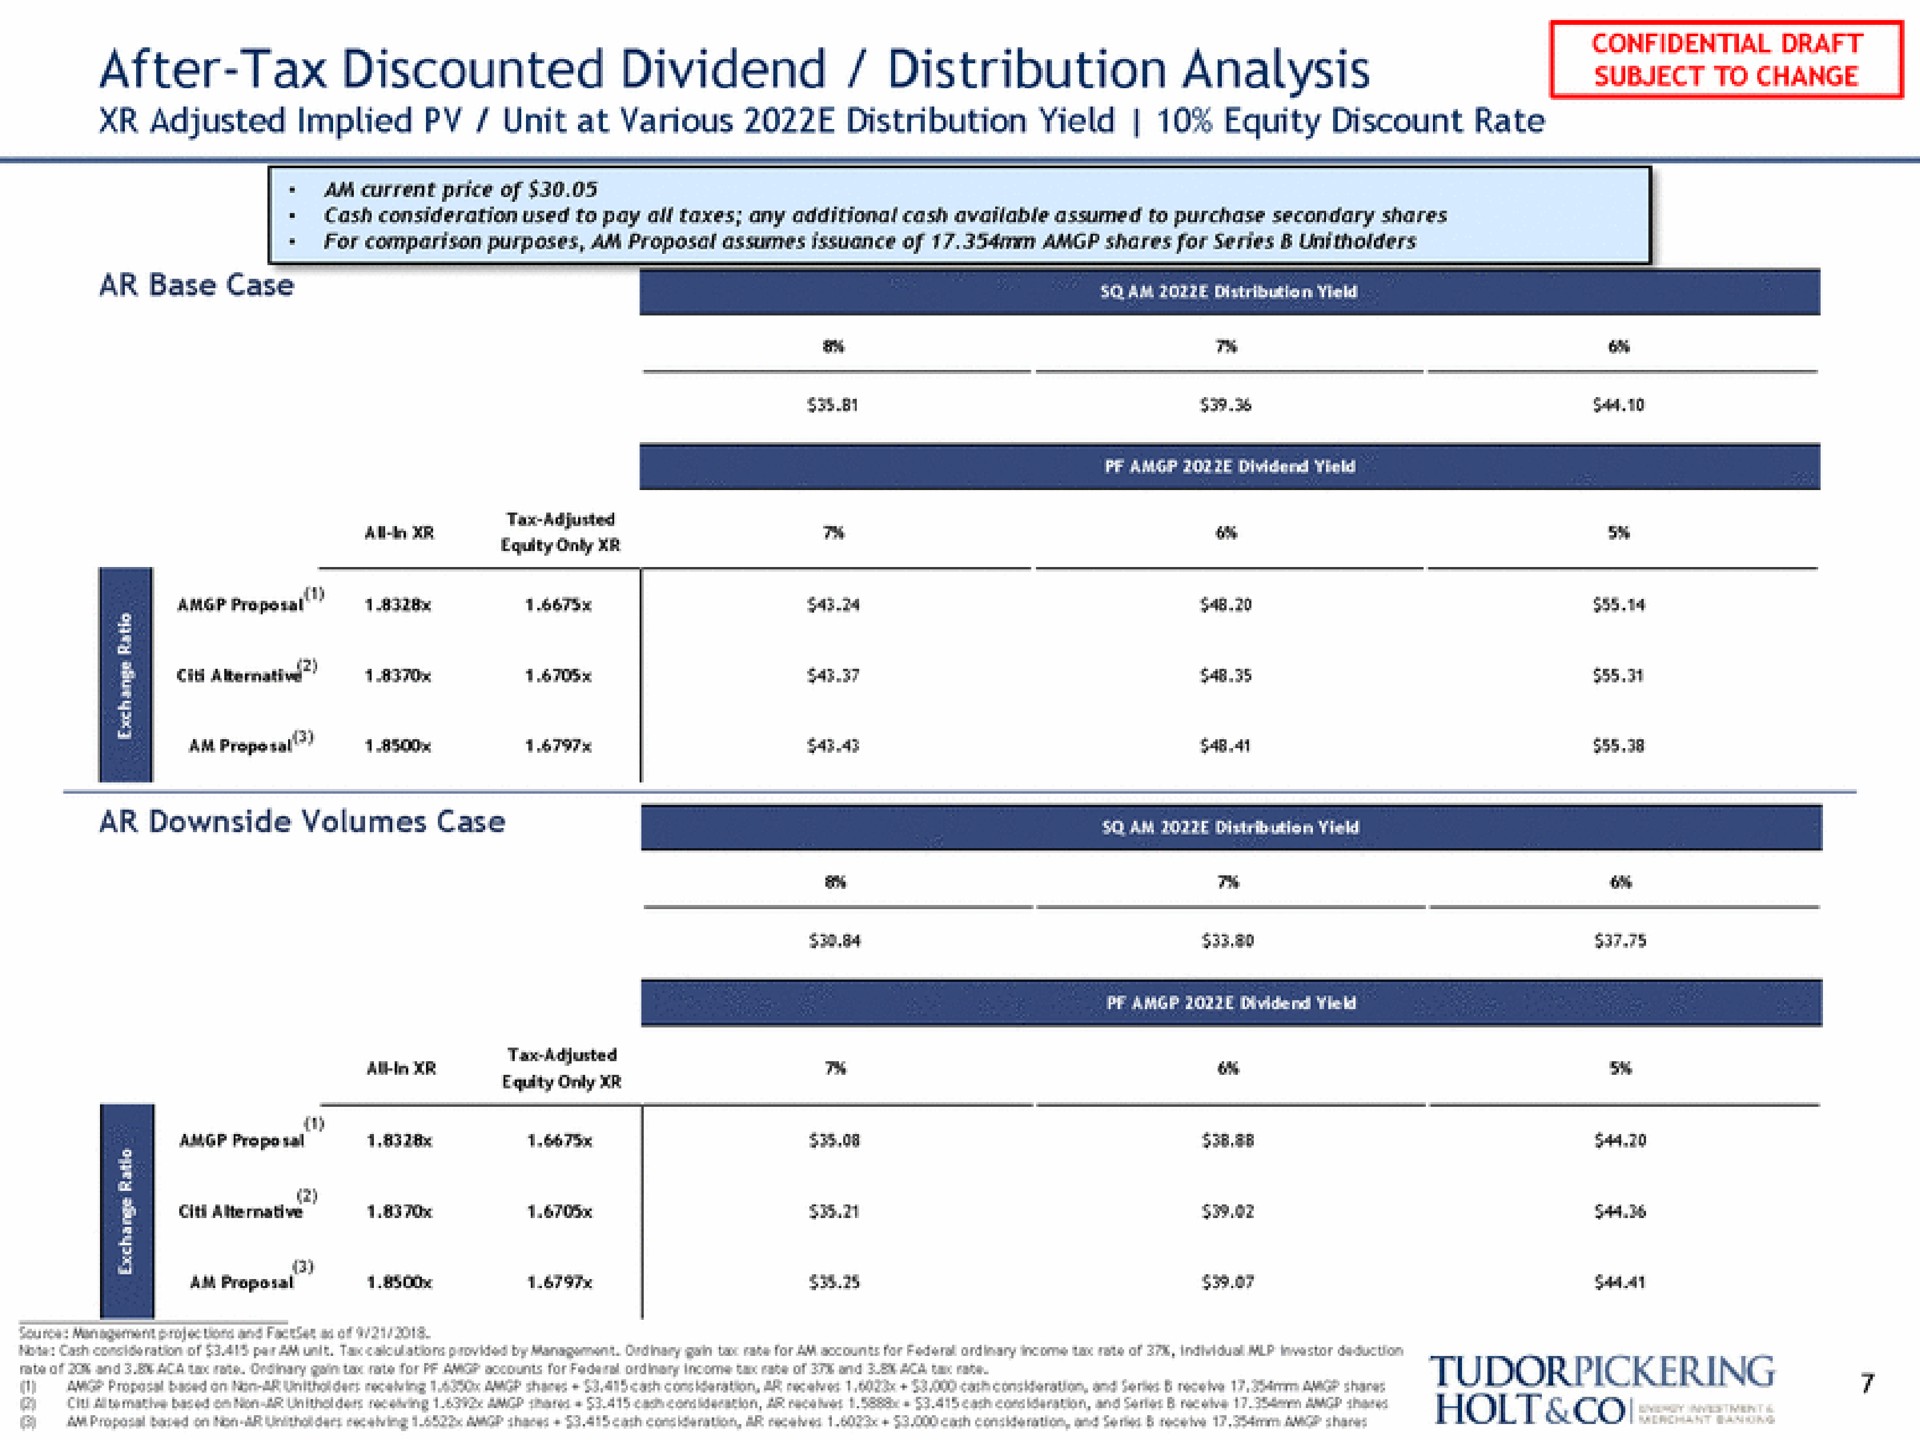 after tax discounted dividend distribution analysis to change subject base case | Tudor, Pickering, Holt & Co